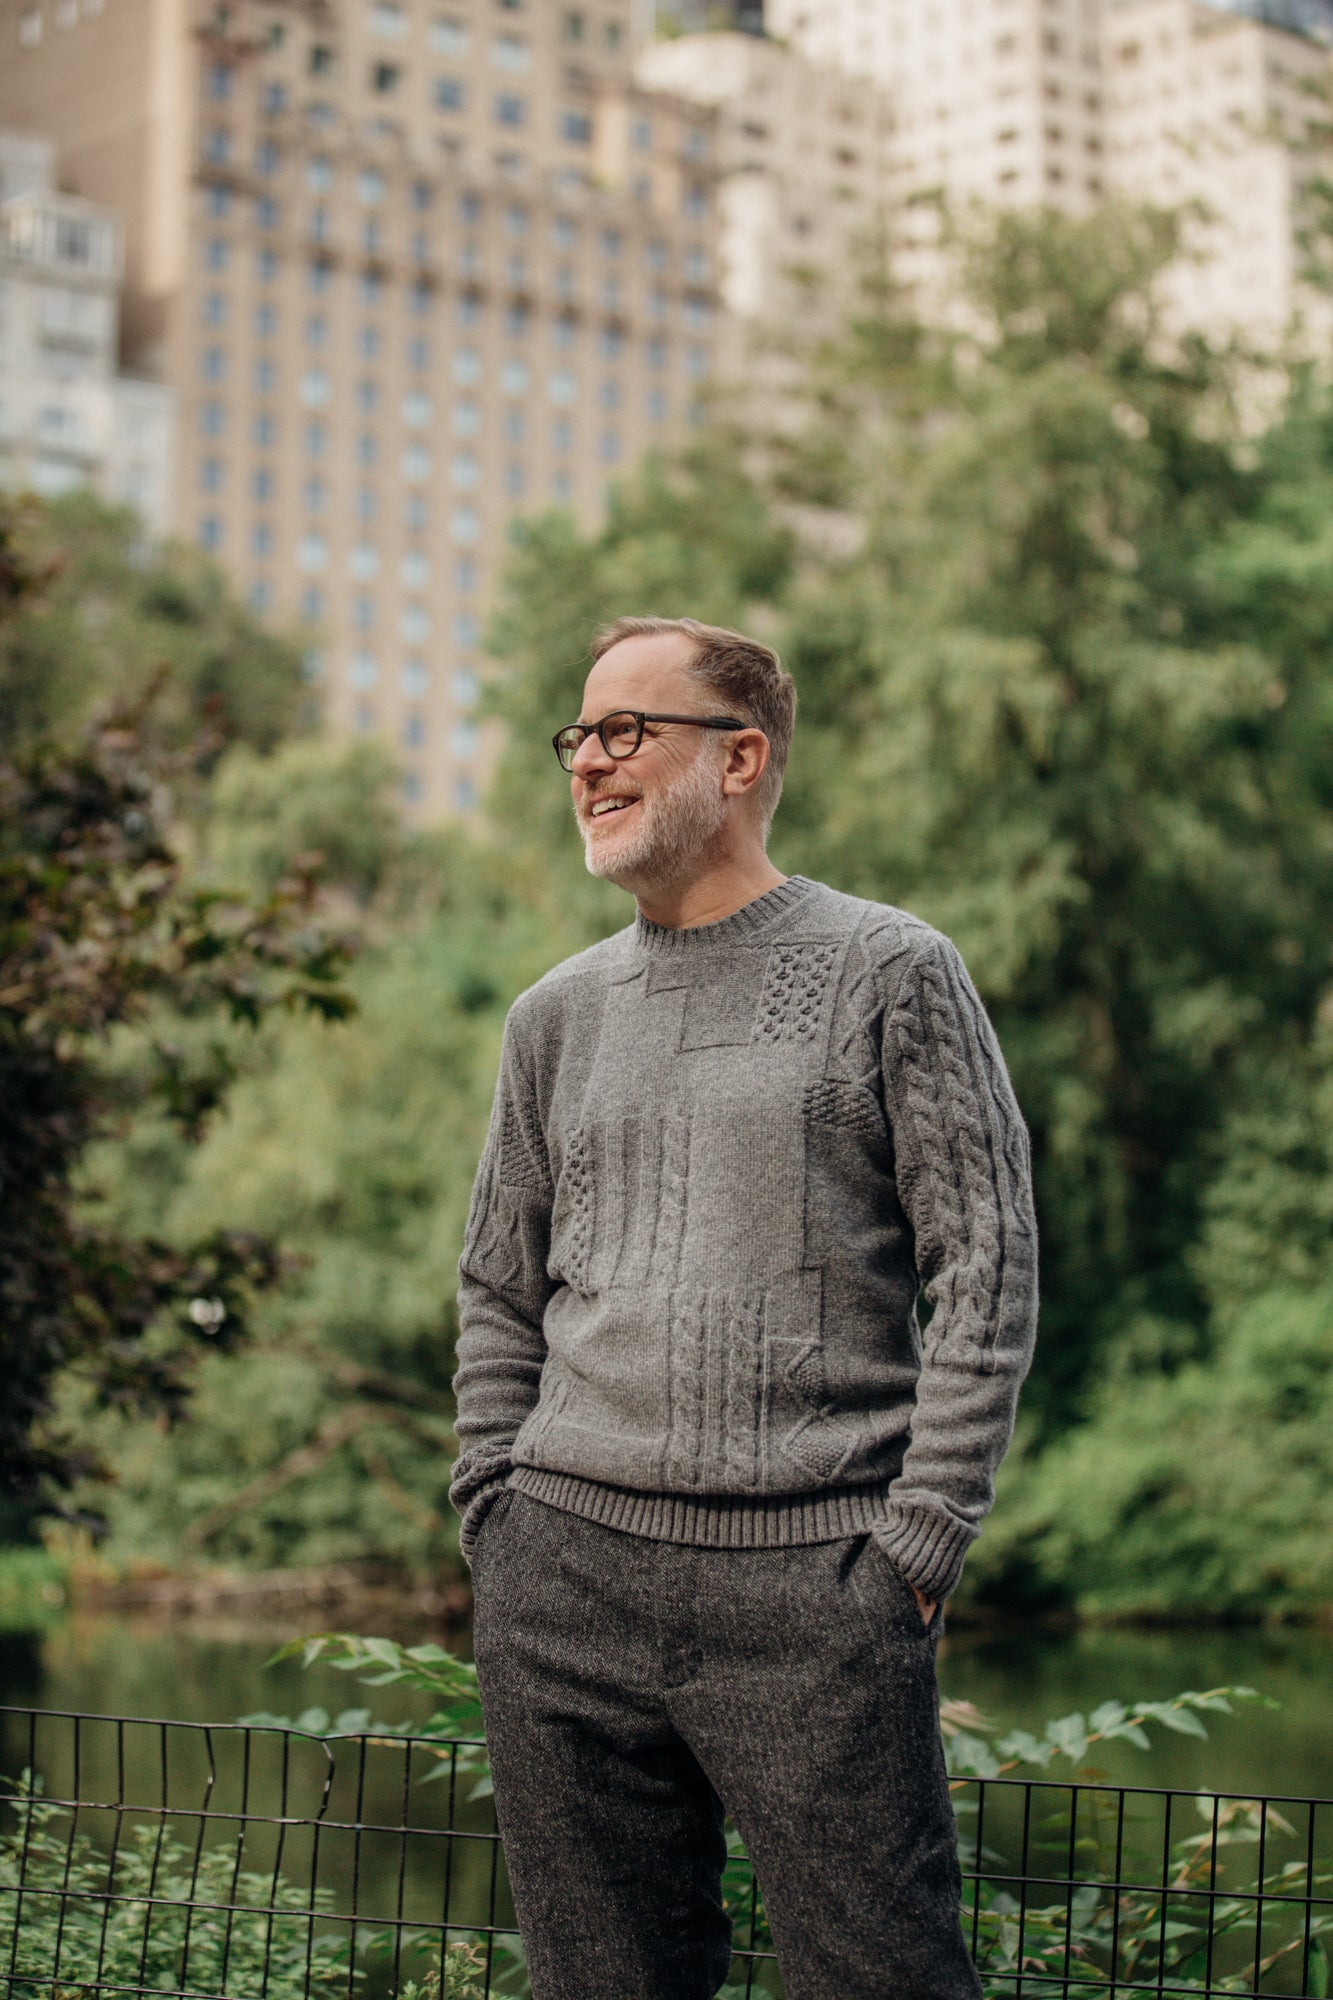 A man stands in a park wearing a glasses and a grey knit sweater.